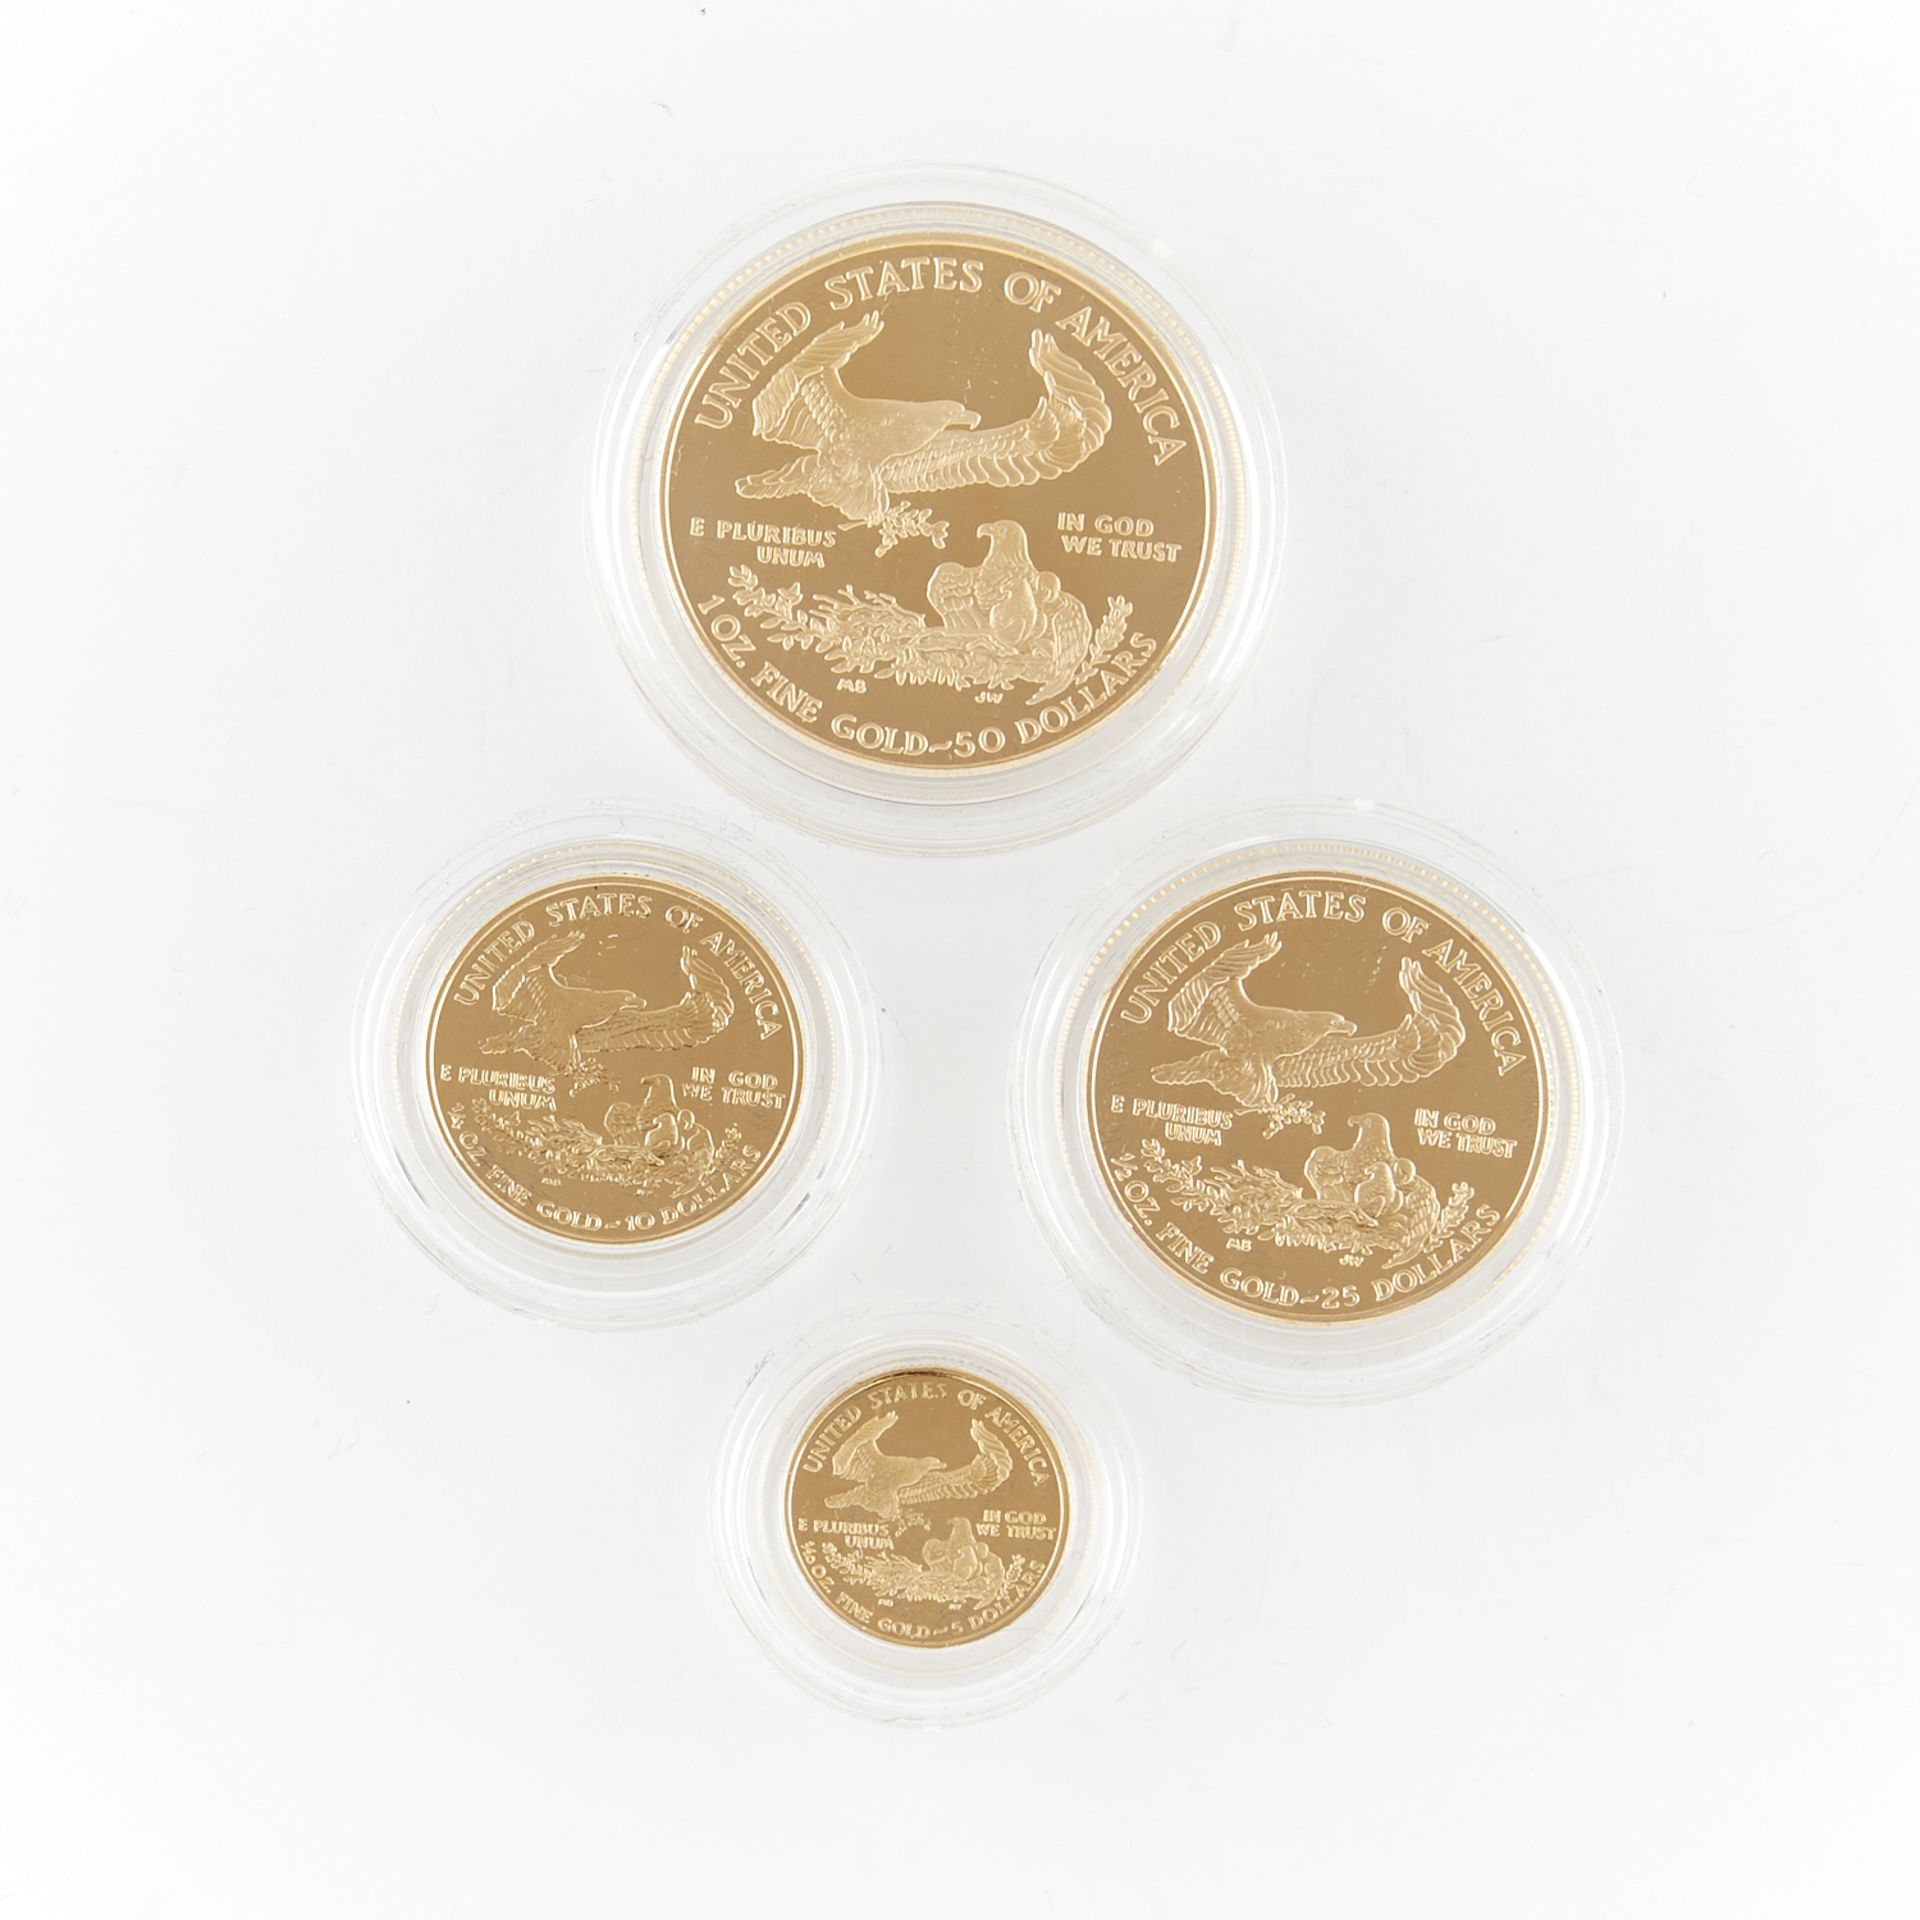 2001 Gold Proof American Eagle 4 Coin Set - Image 2 of 3